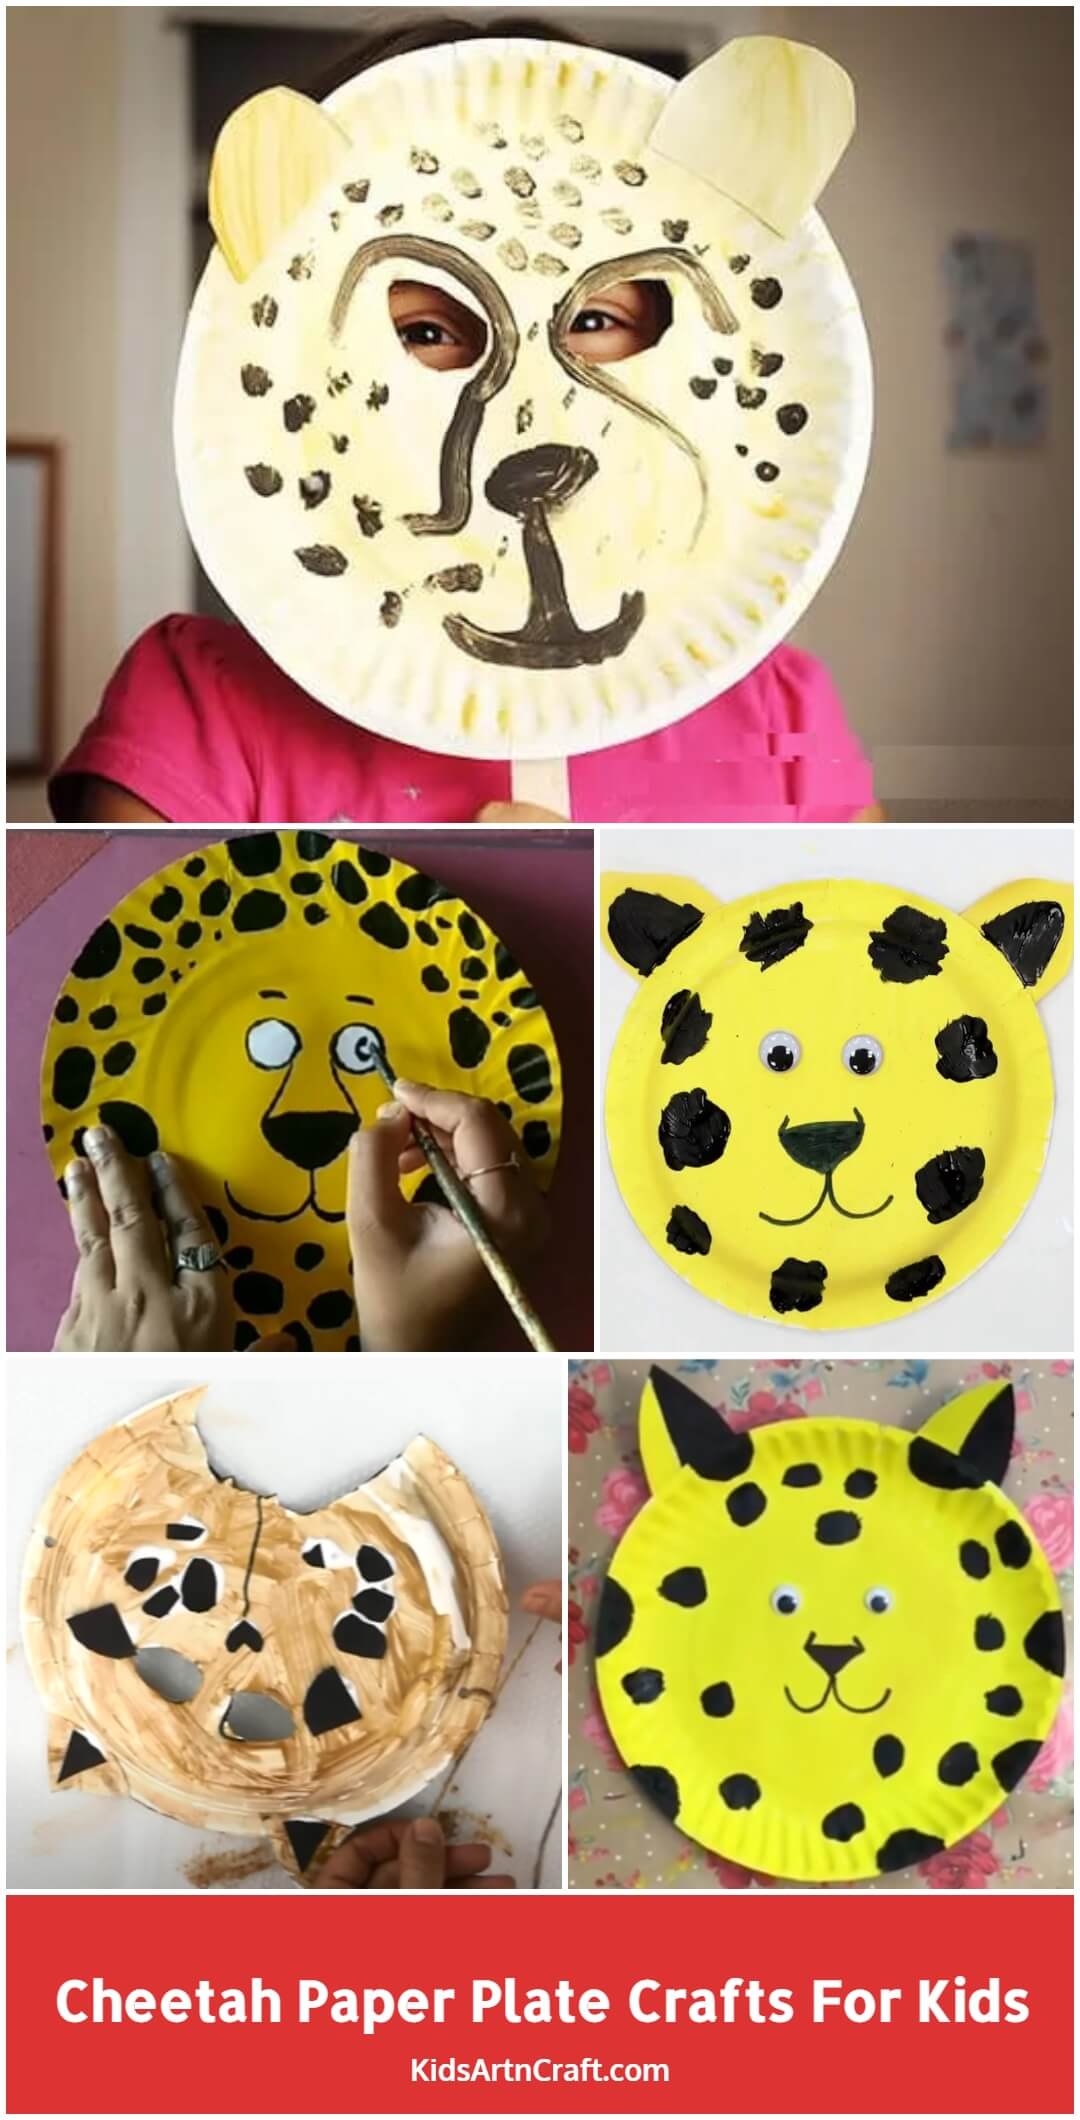 Cheetah Paper Plate Crafts For Kids